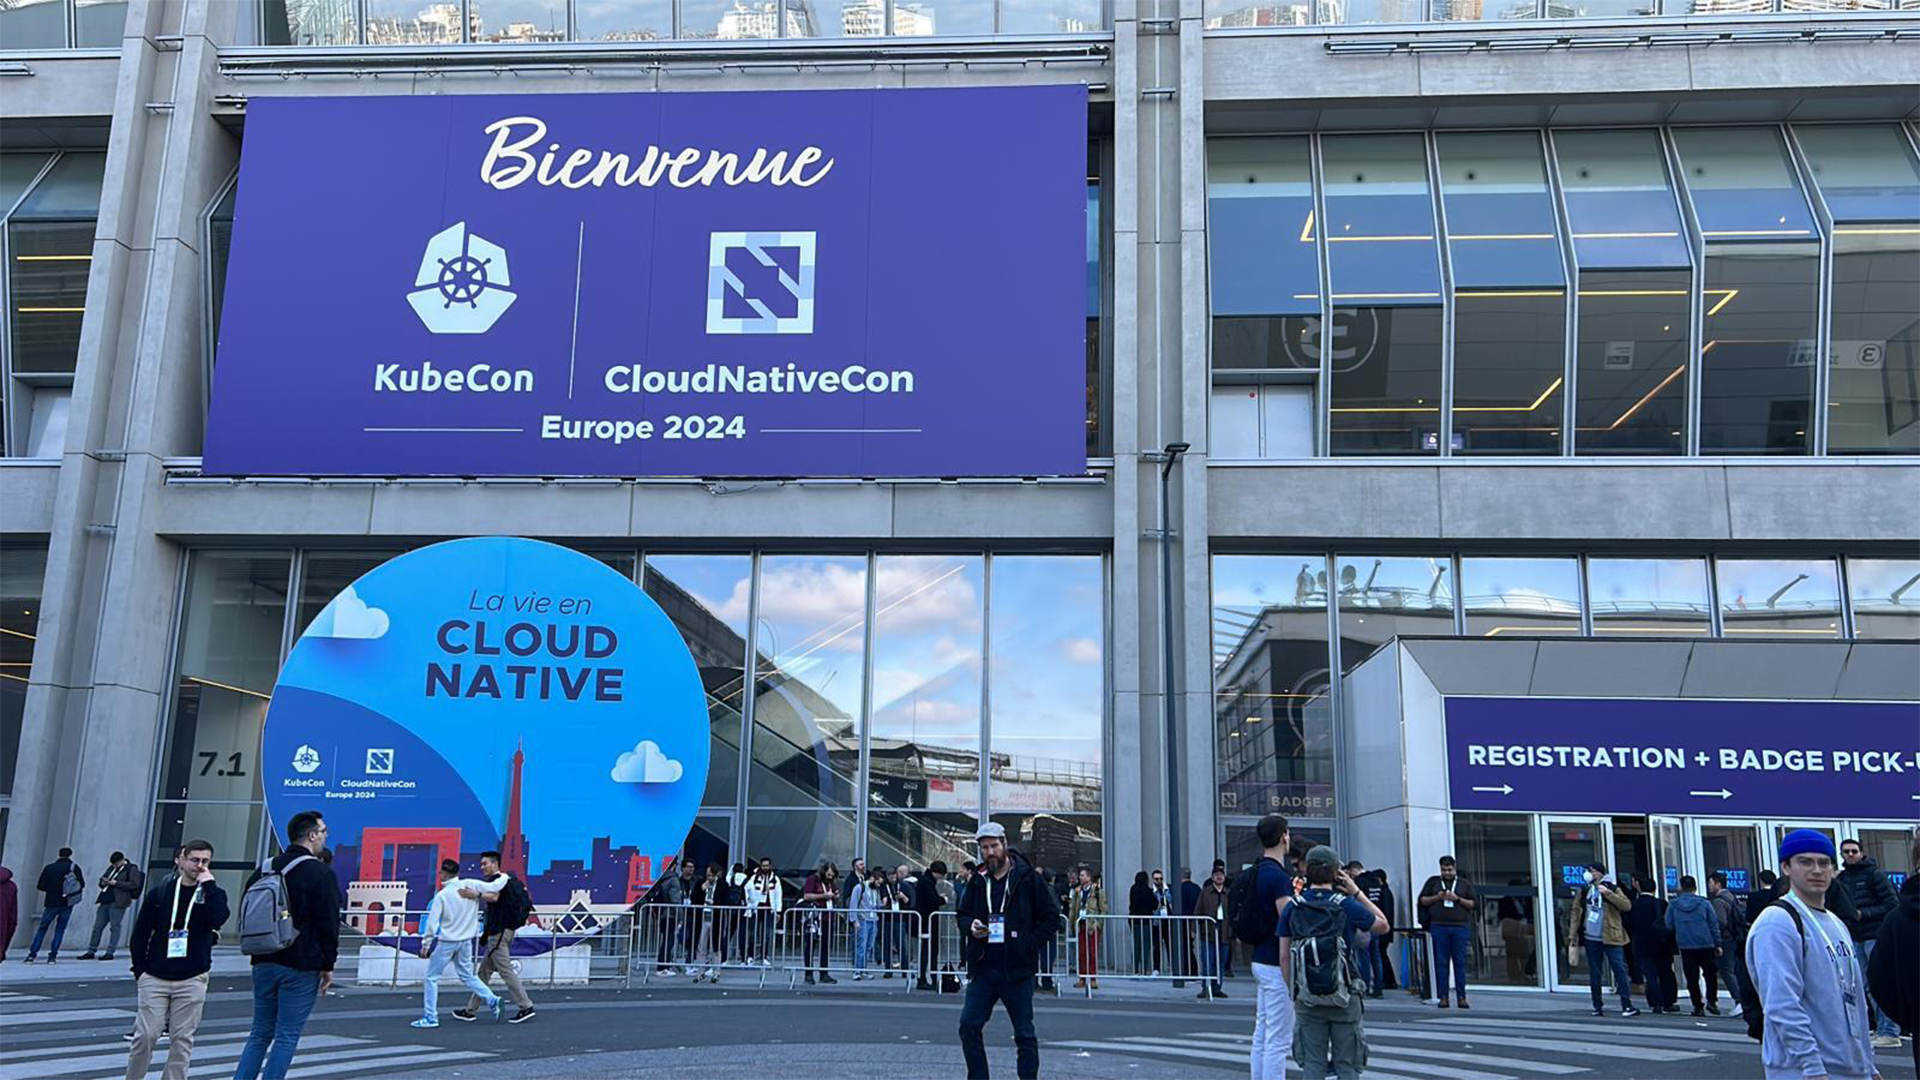 KubeCon 2024: all the latest news and announcements